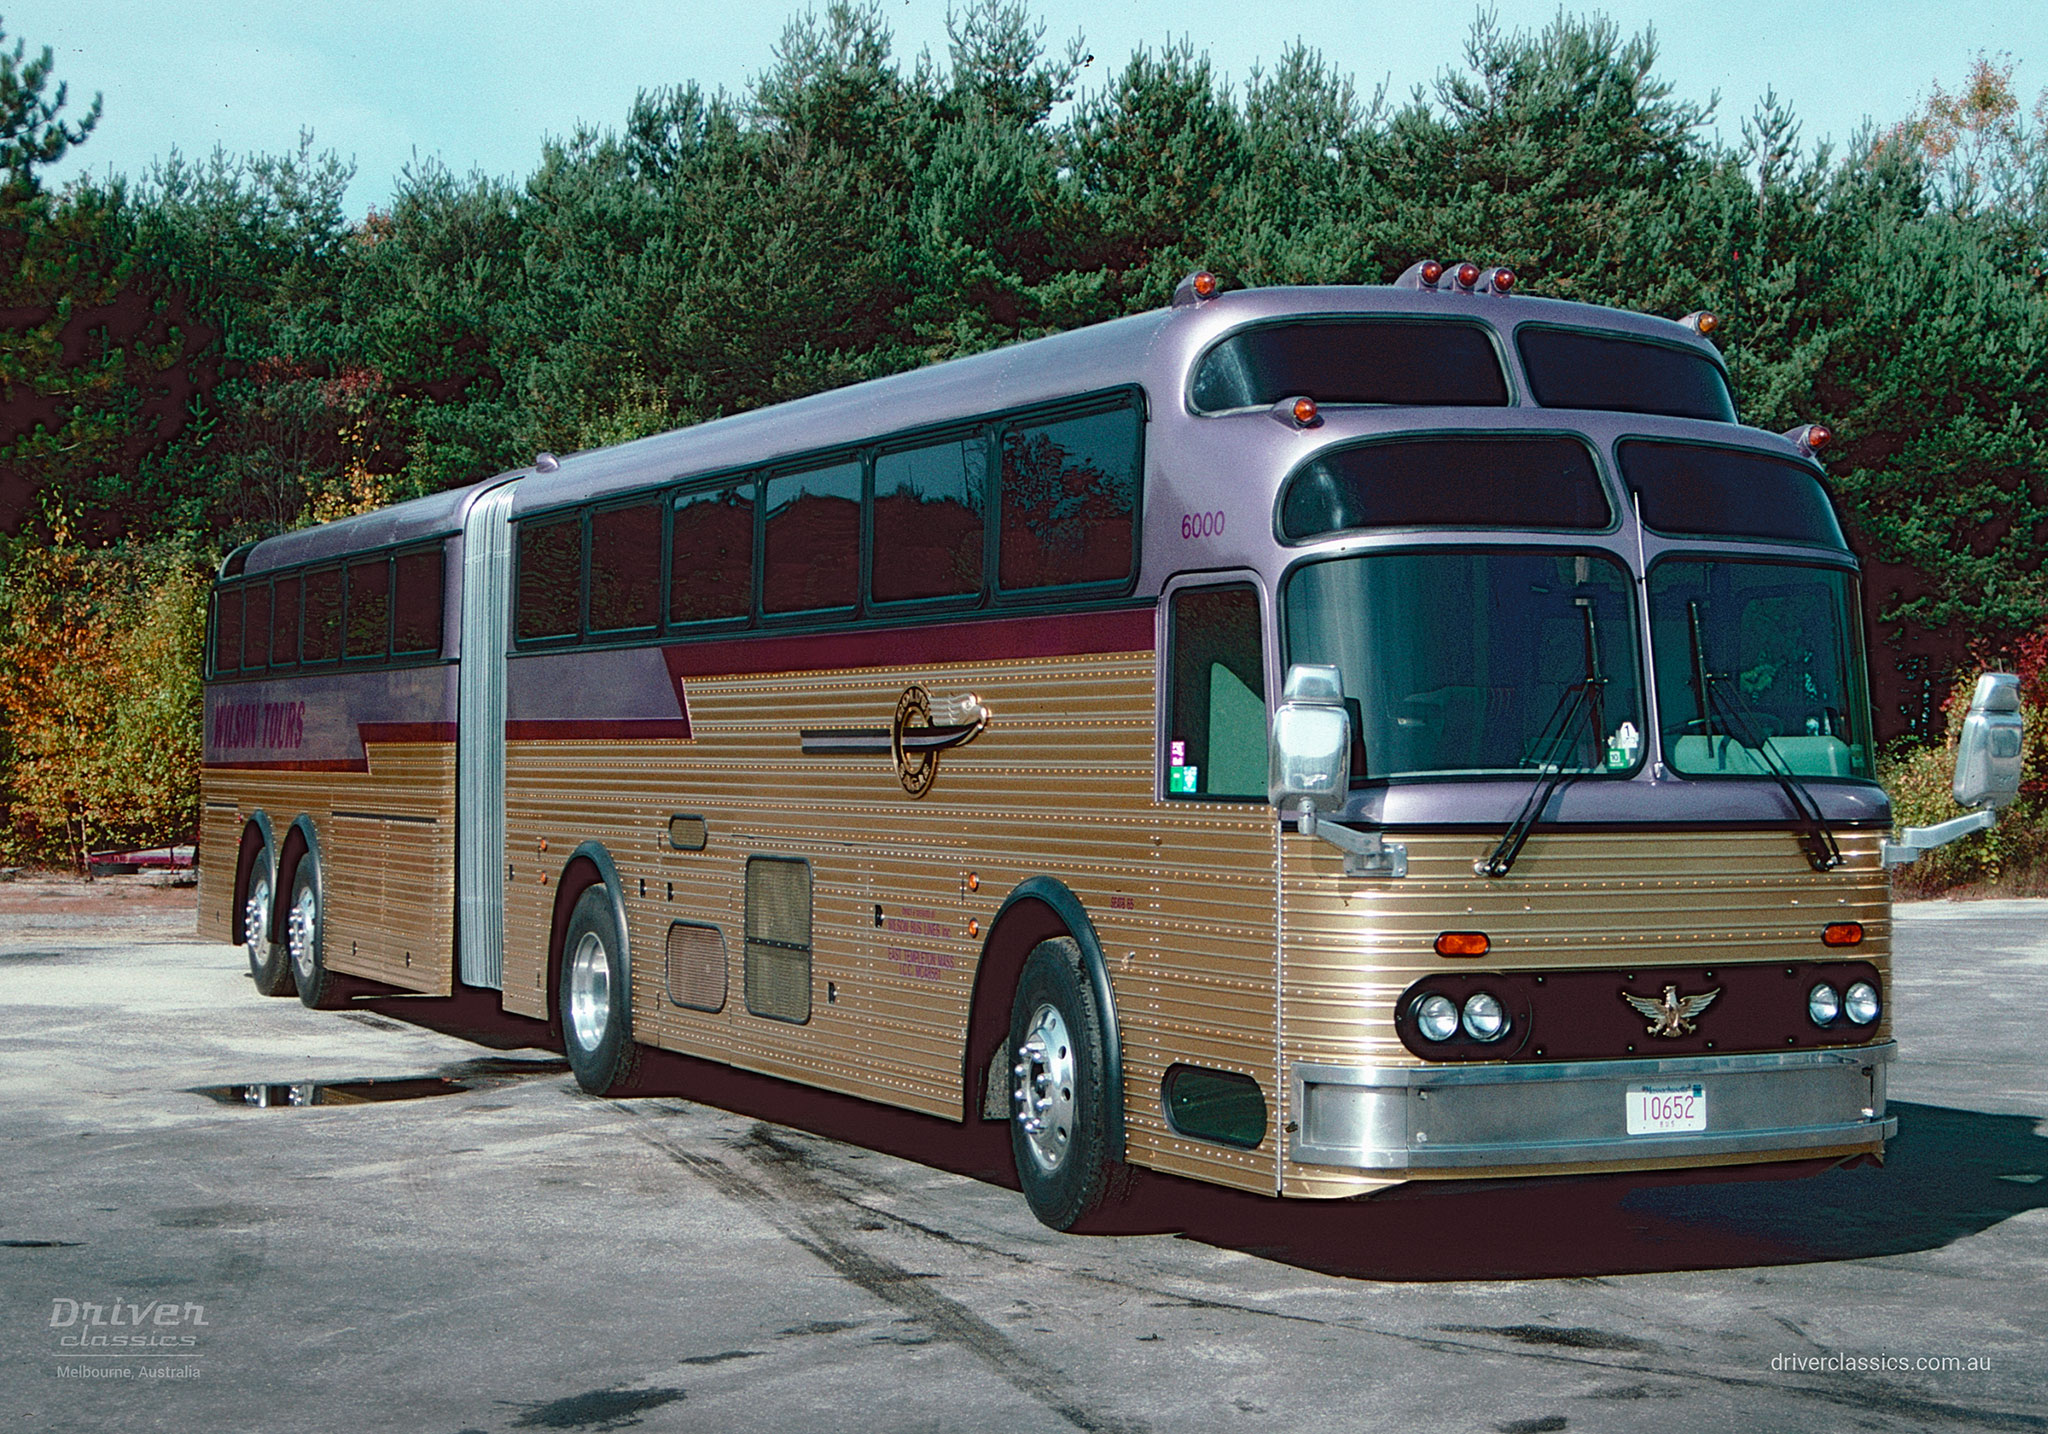 Super Golden Eagle bus, 1959 model, articualted bus without front end panel that looks like a brow or moustache. Photo taken East Templeton MA USA in October 1992 by Bob Reddan.